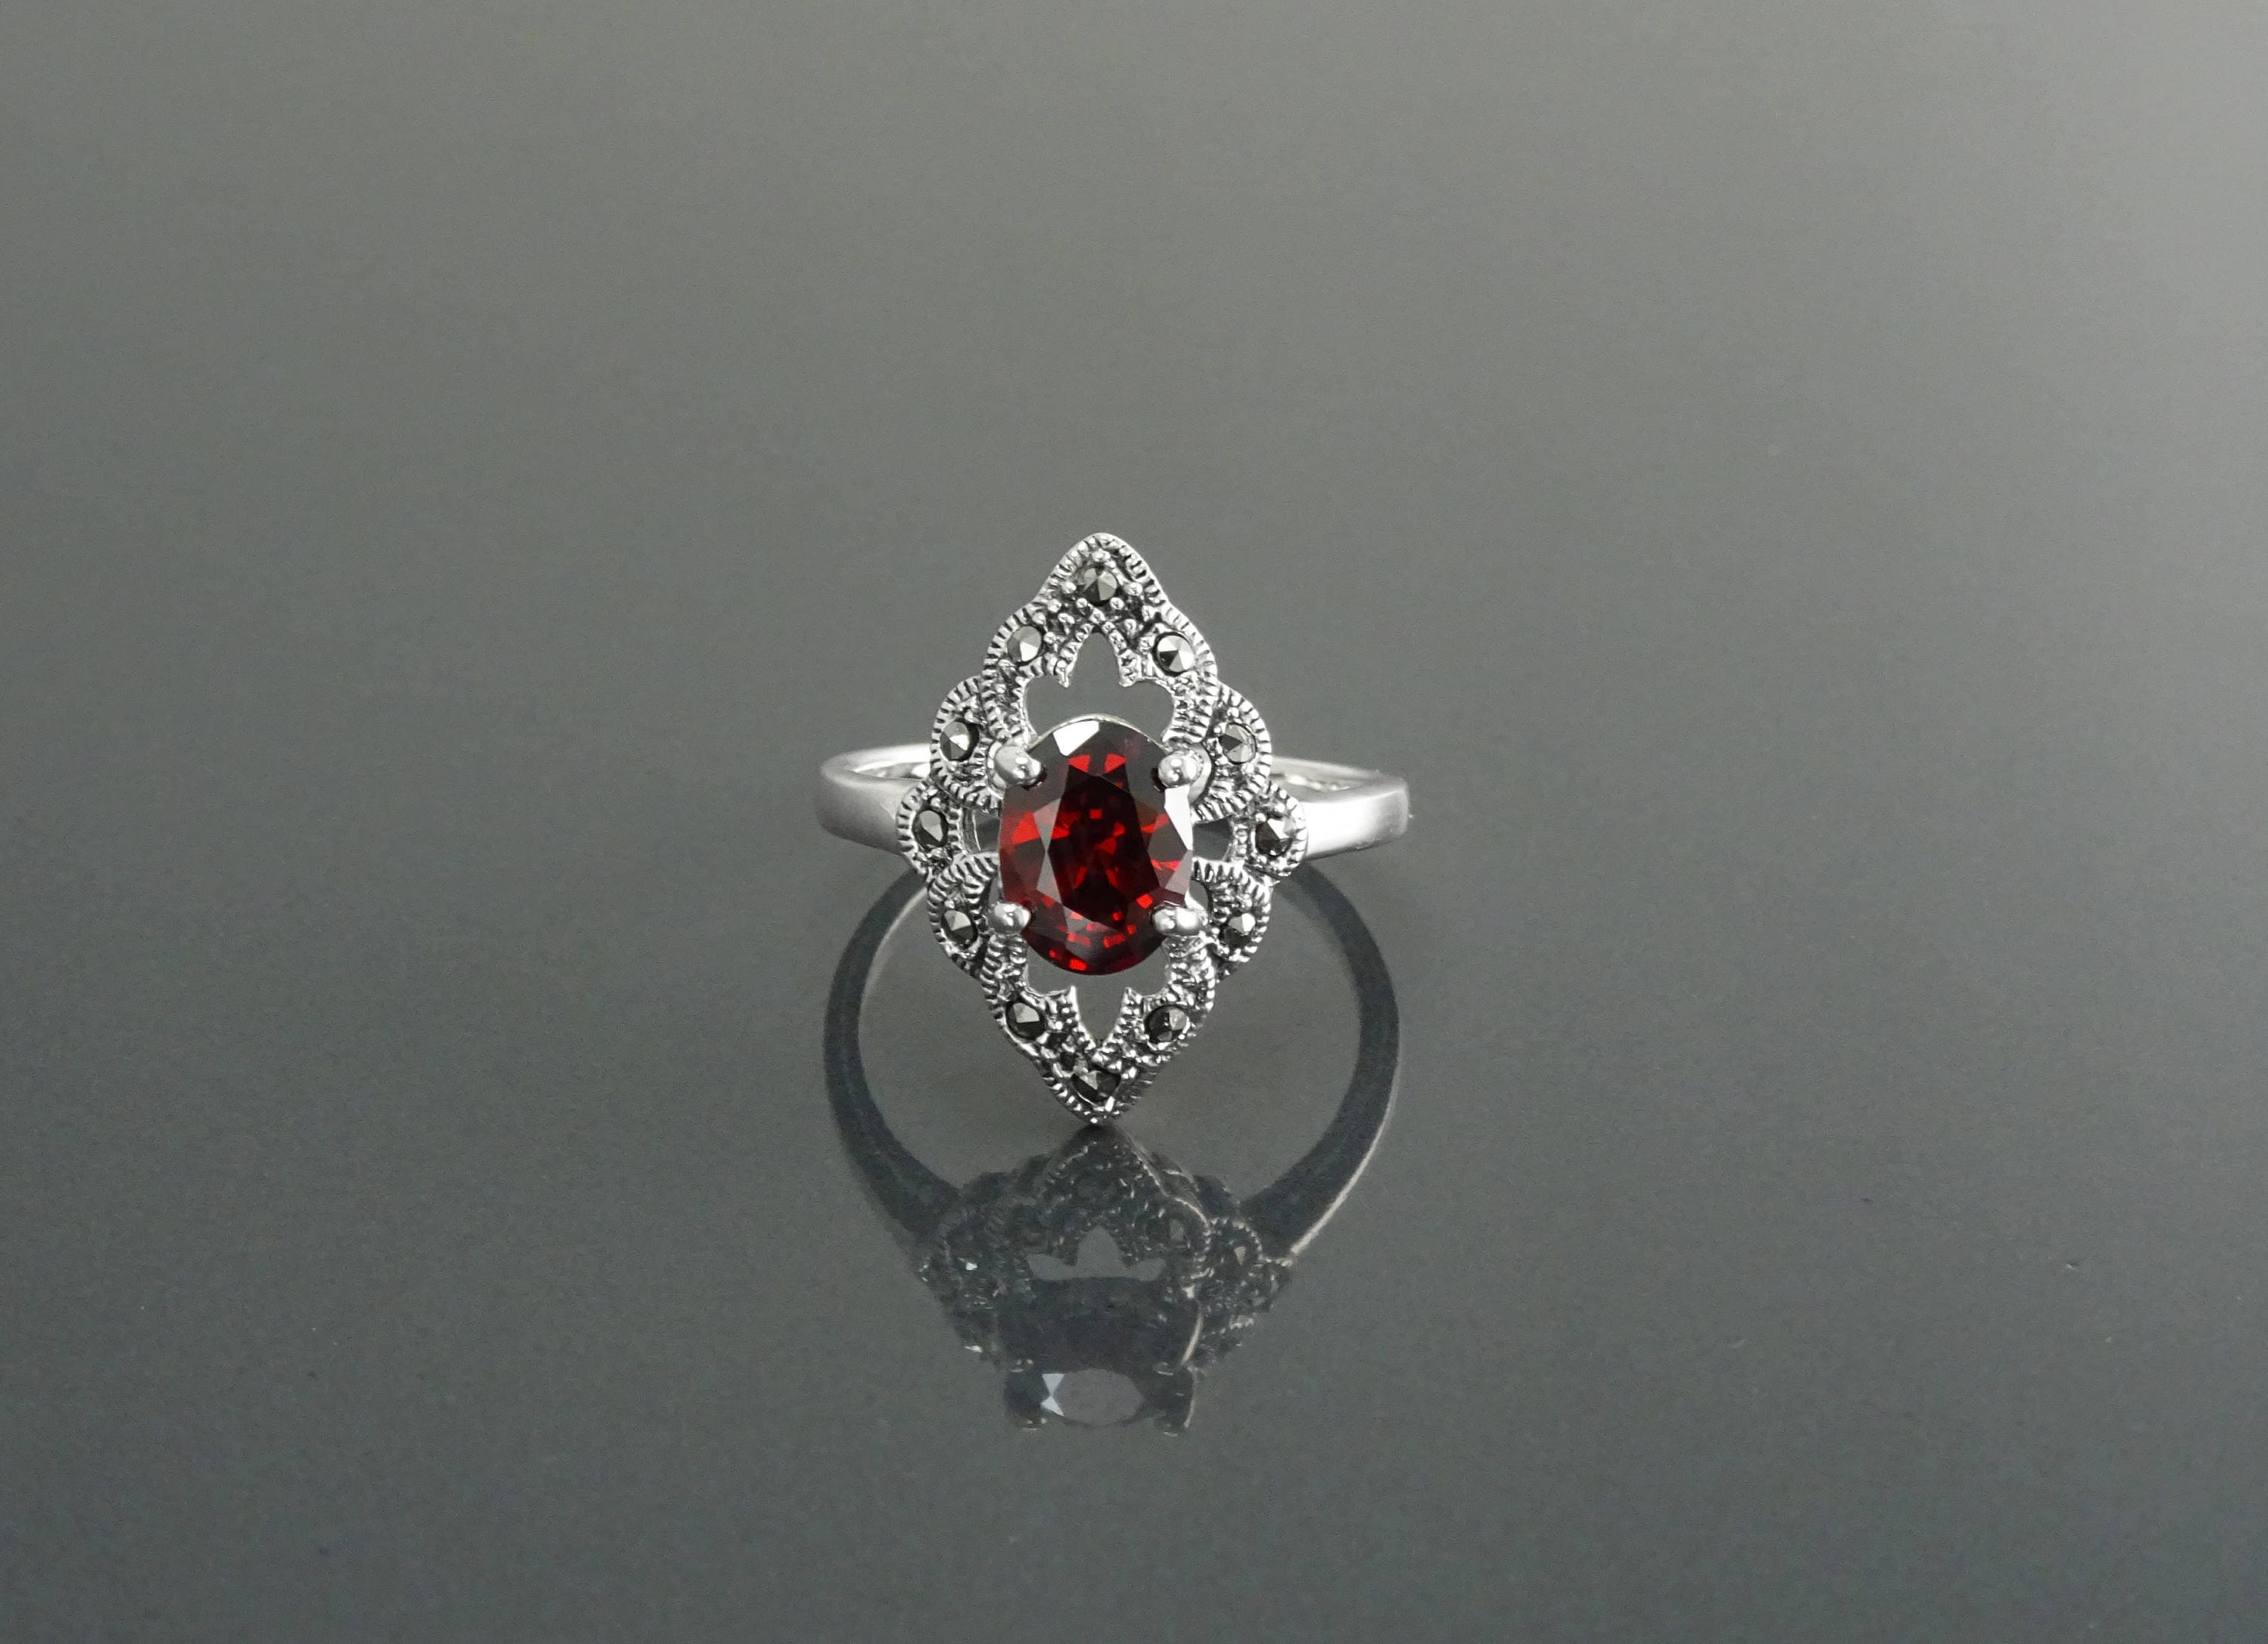 Gorgeous VINTAGE STYLE Oxidized Garnet MARQUISE Ring .925 Sterling Silver 